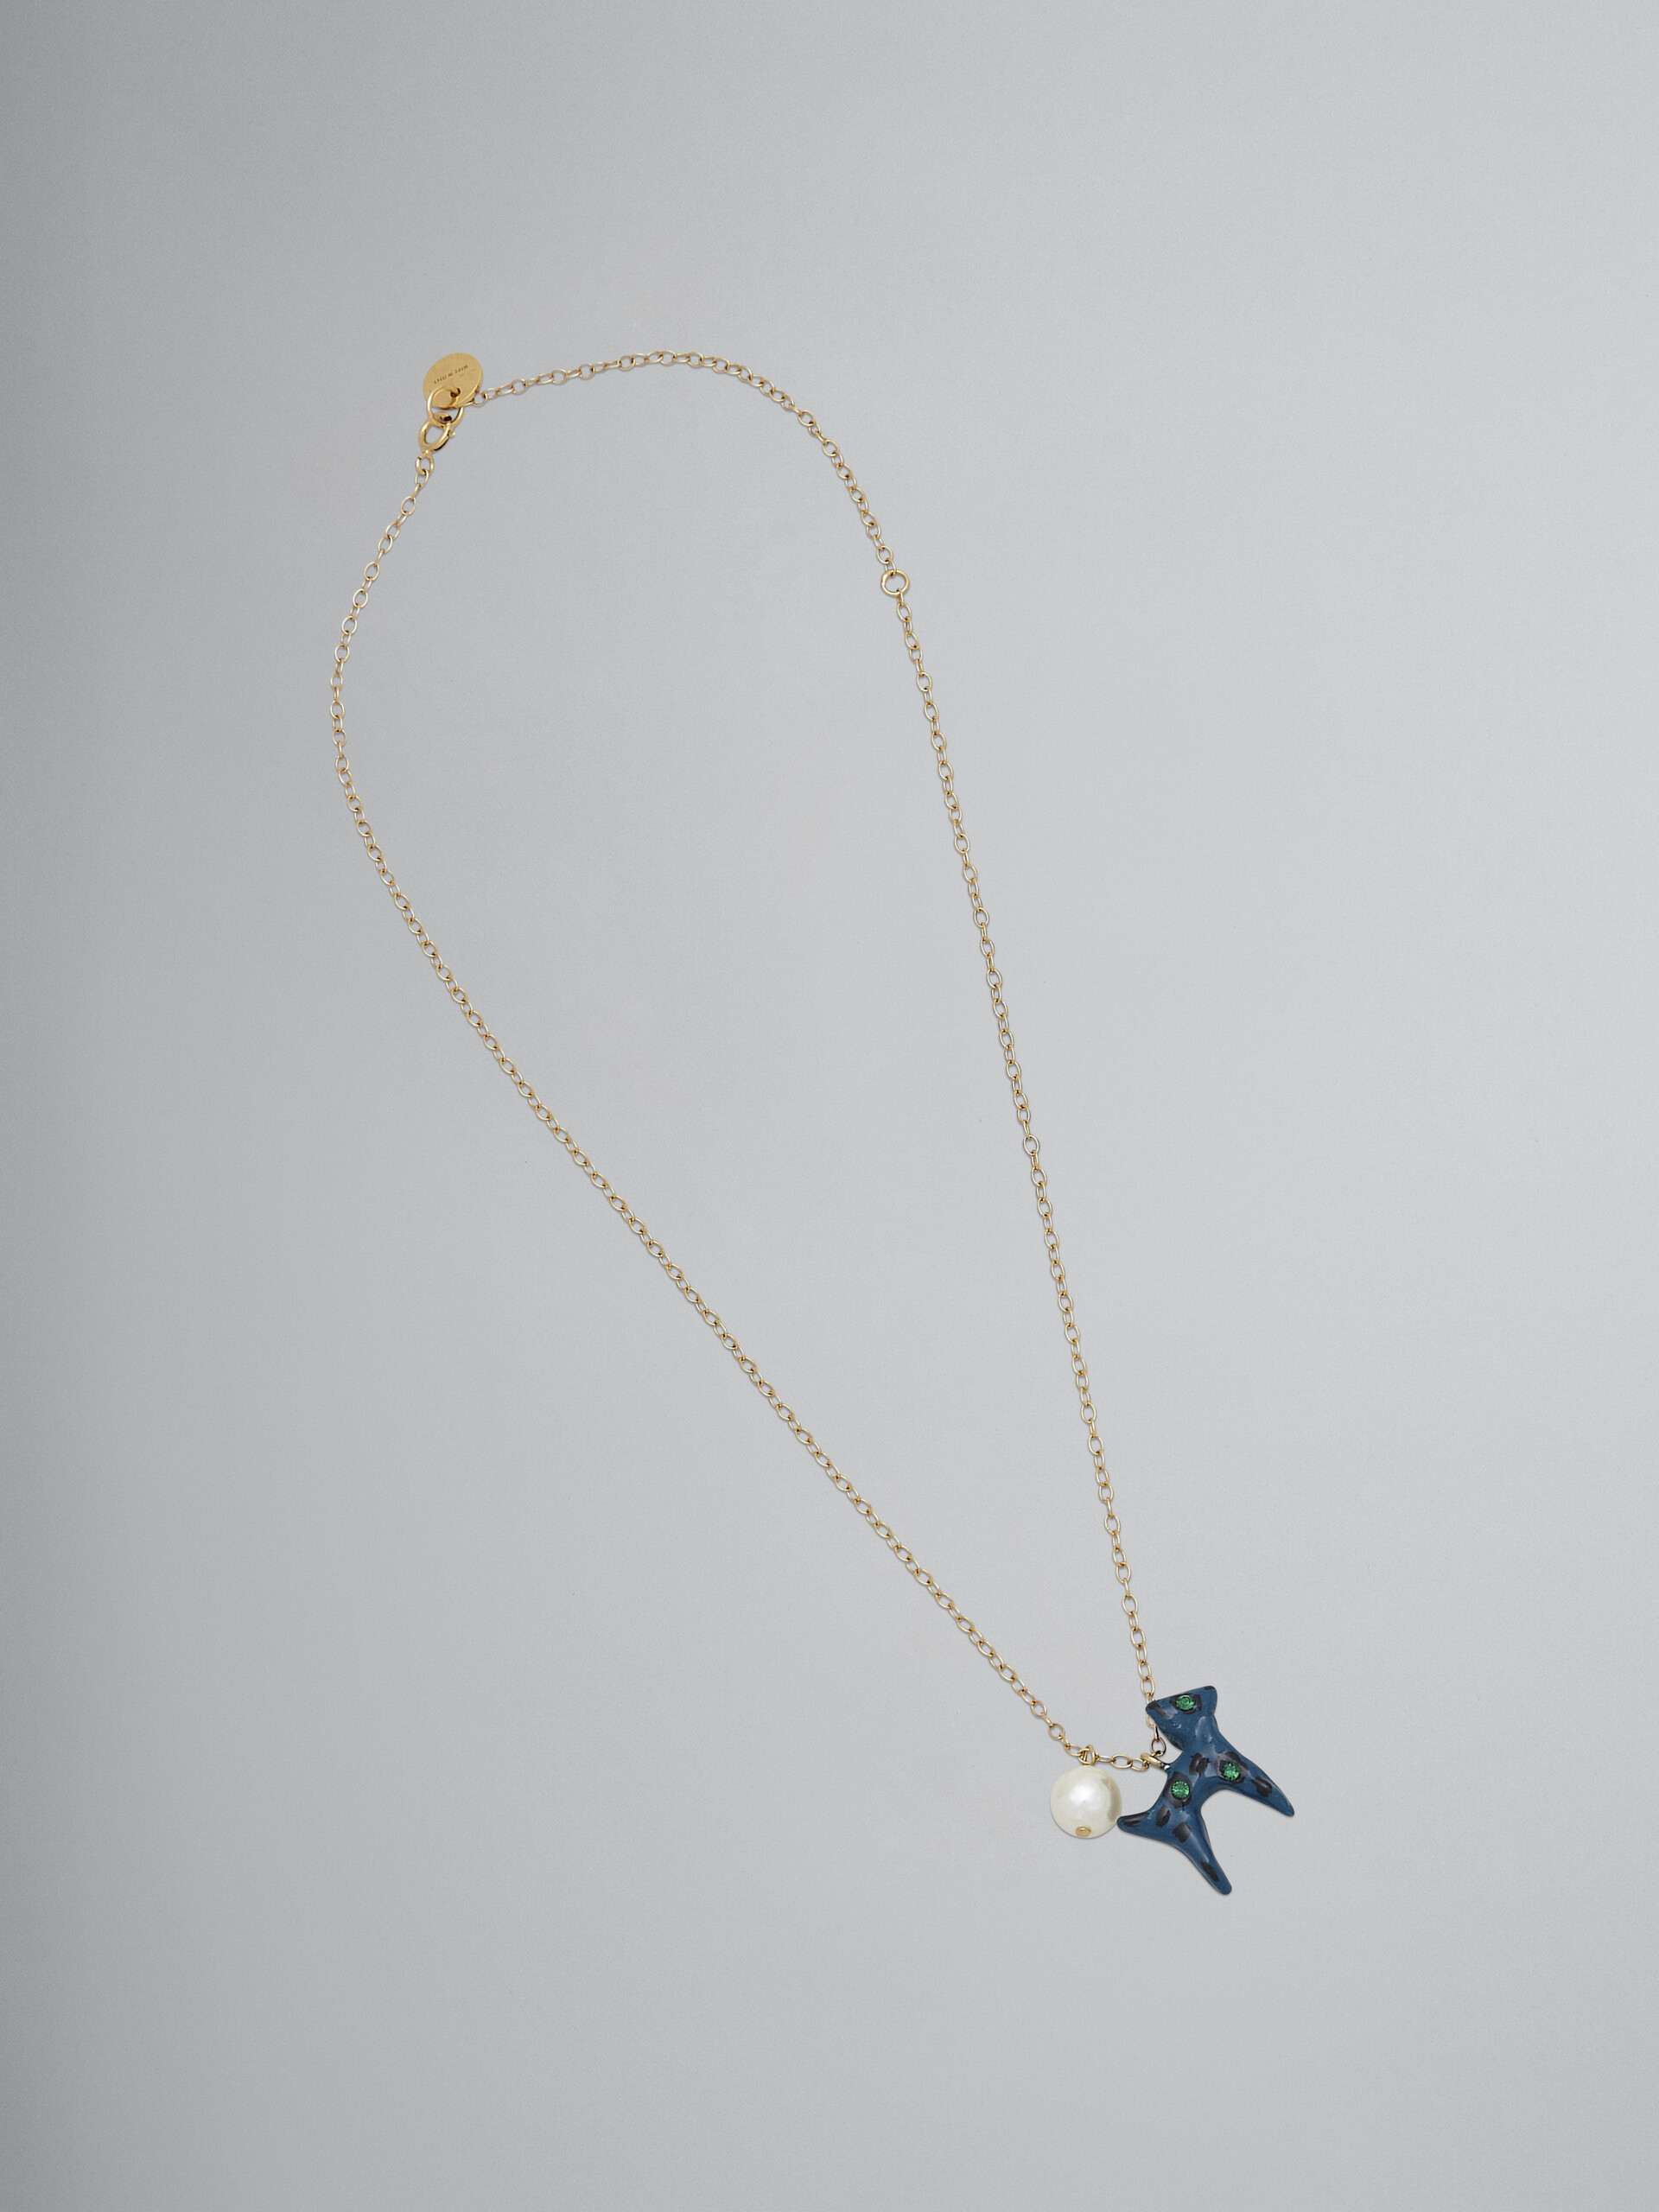 Collier PLAYFUL bleu - Colliers - Image 1